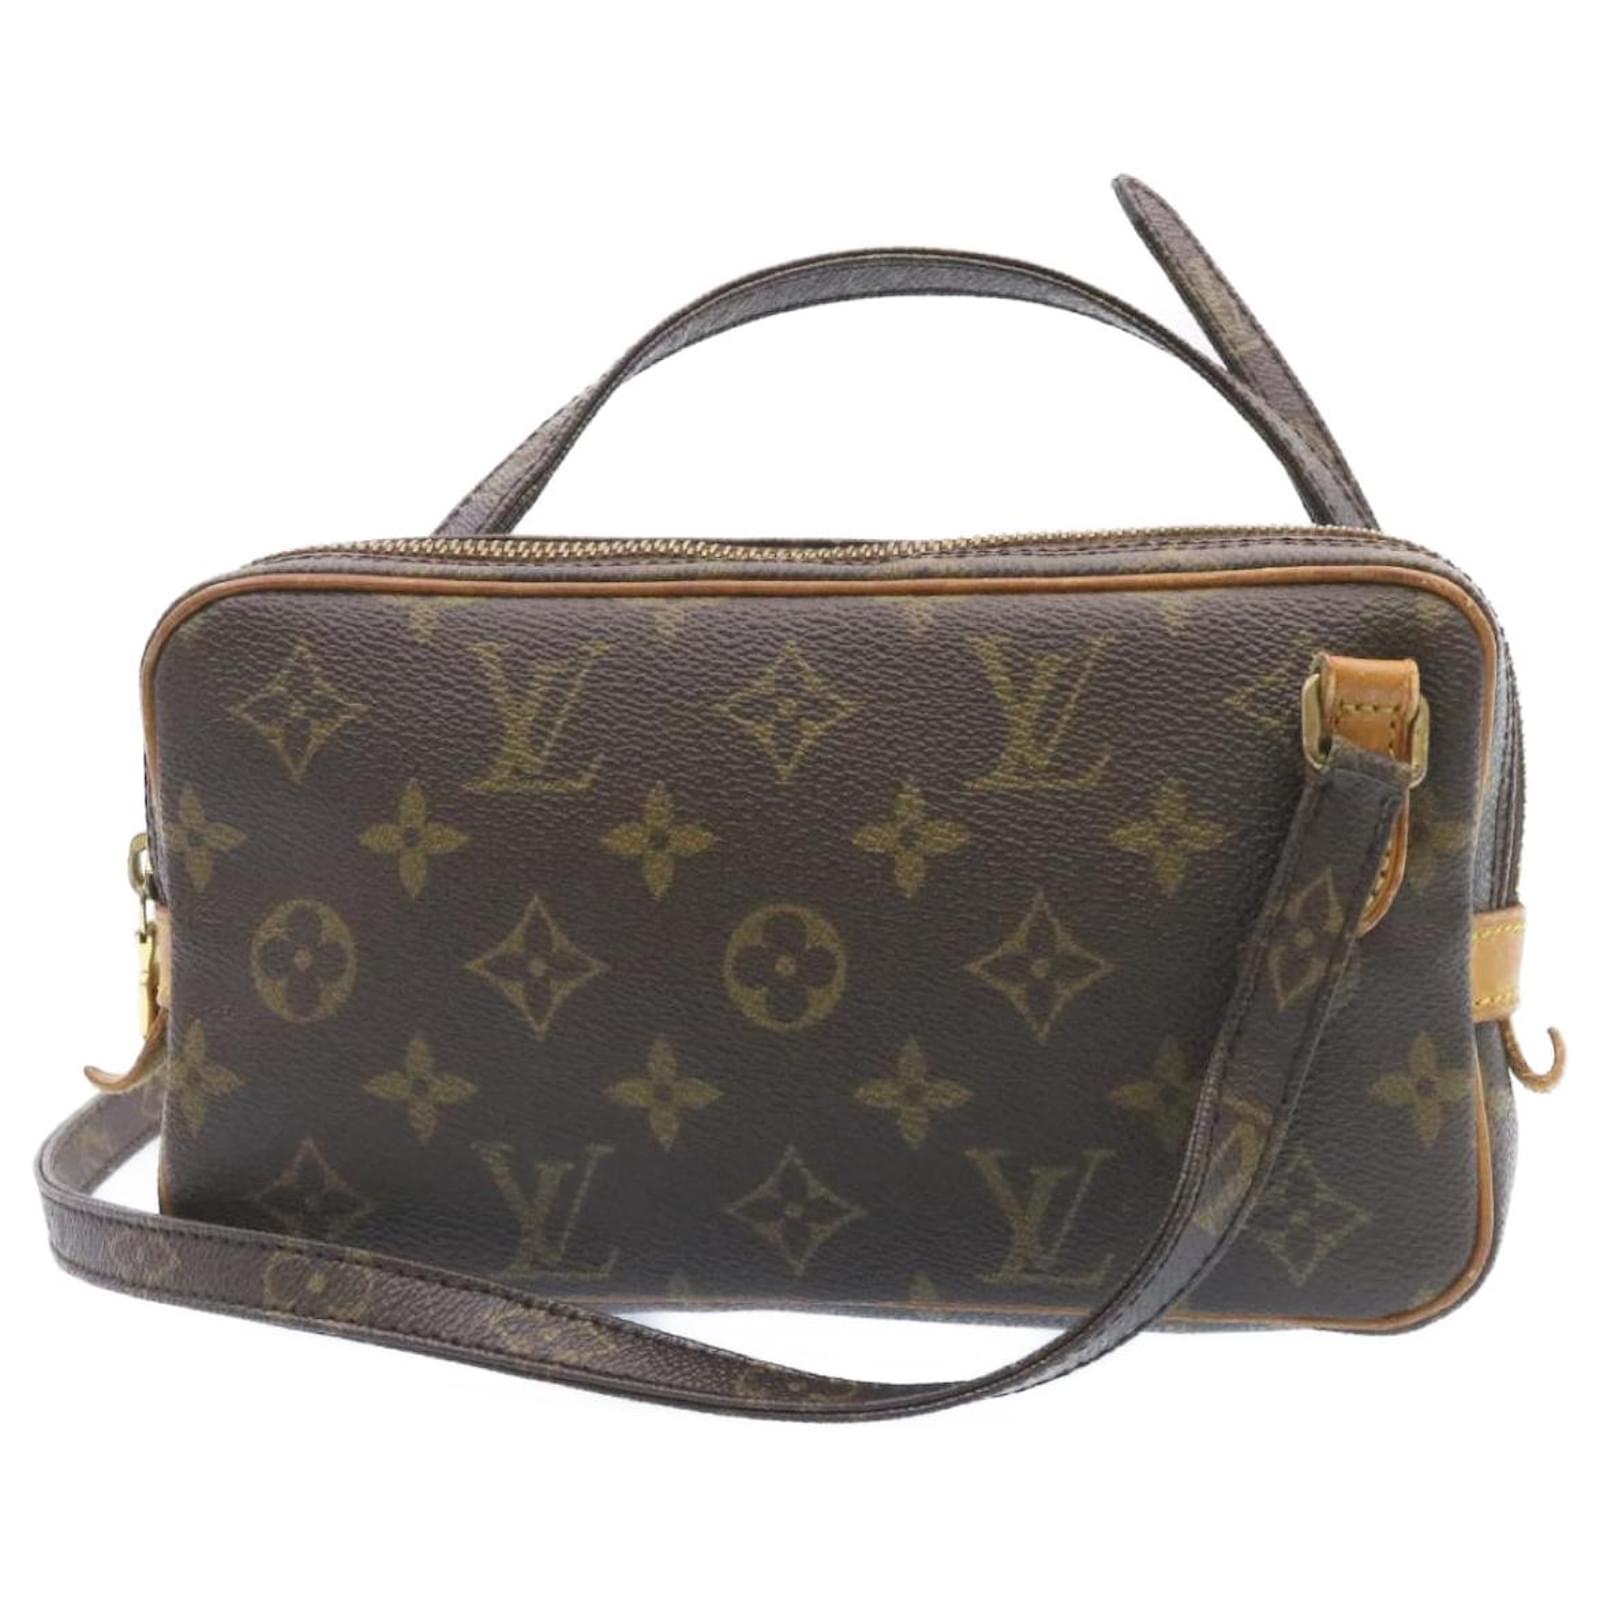 Louis Vuitton Marly Bandouliere crossbody bag